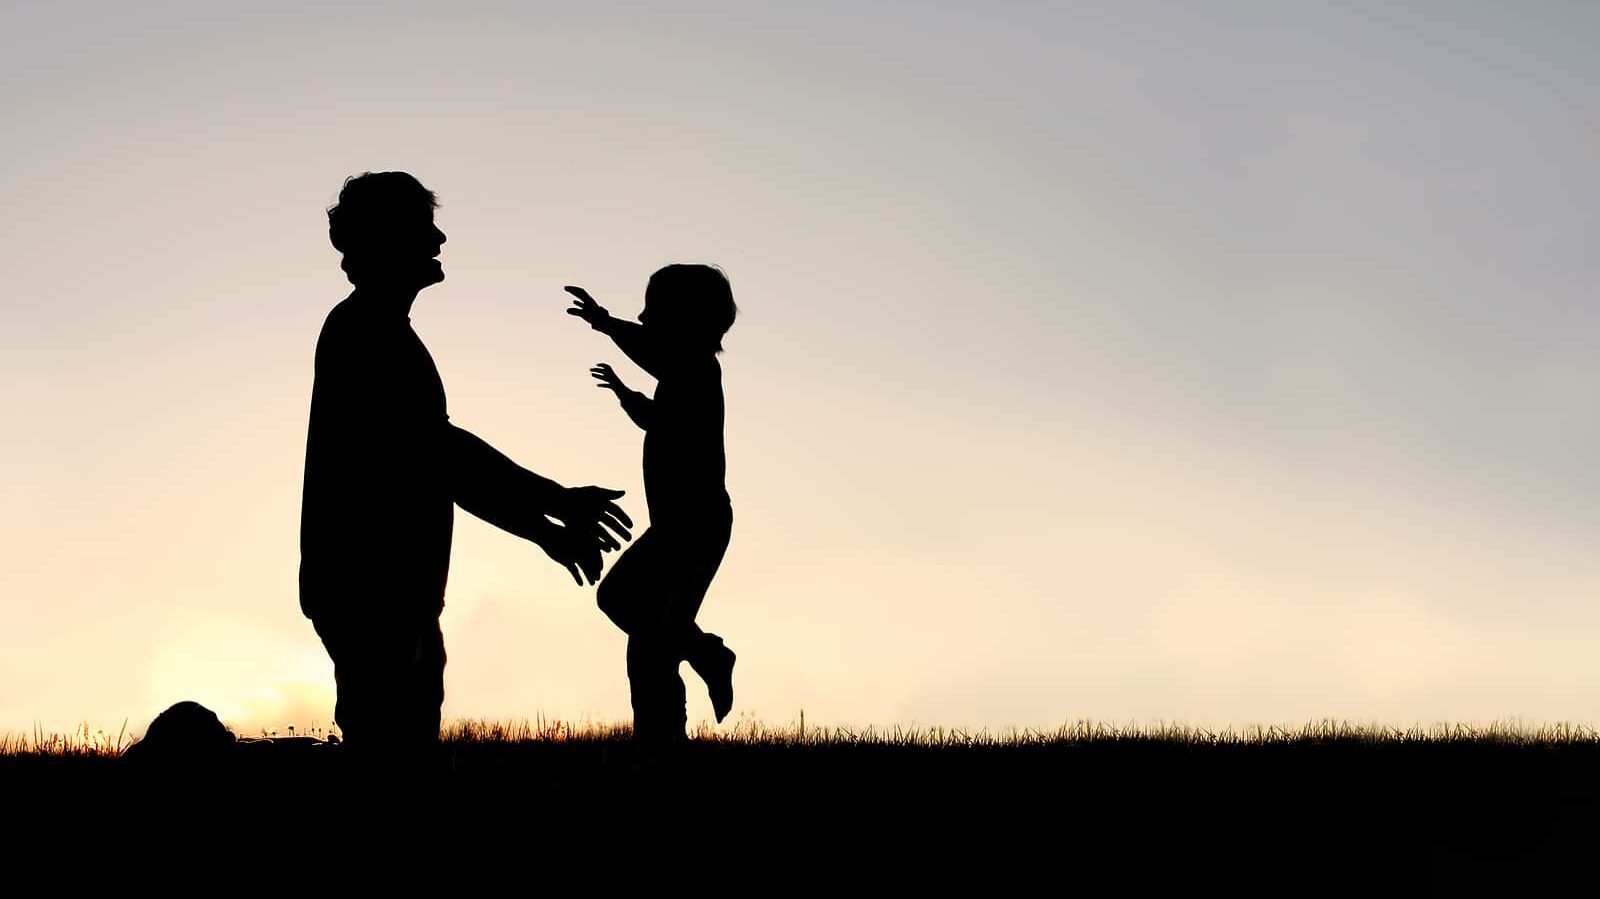 Silhouette of a happy young child smiling as he runs to greet his father with a hug at sunset on a summer day.